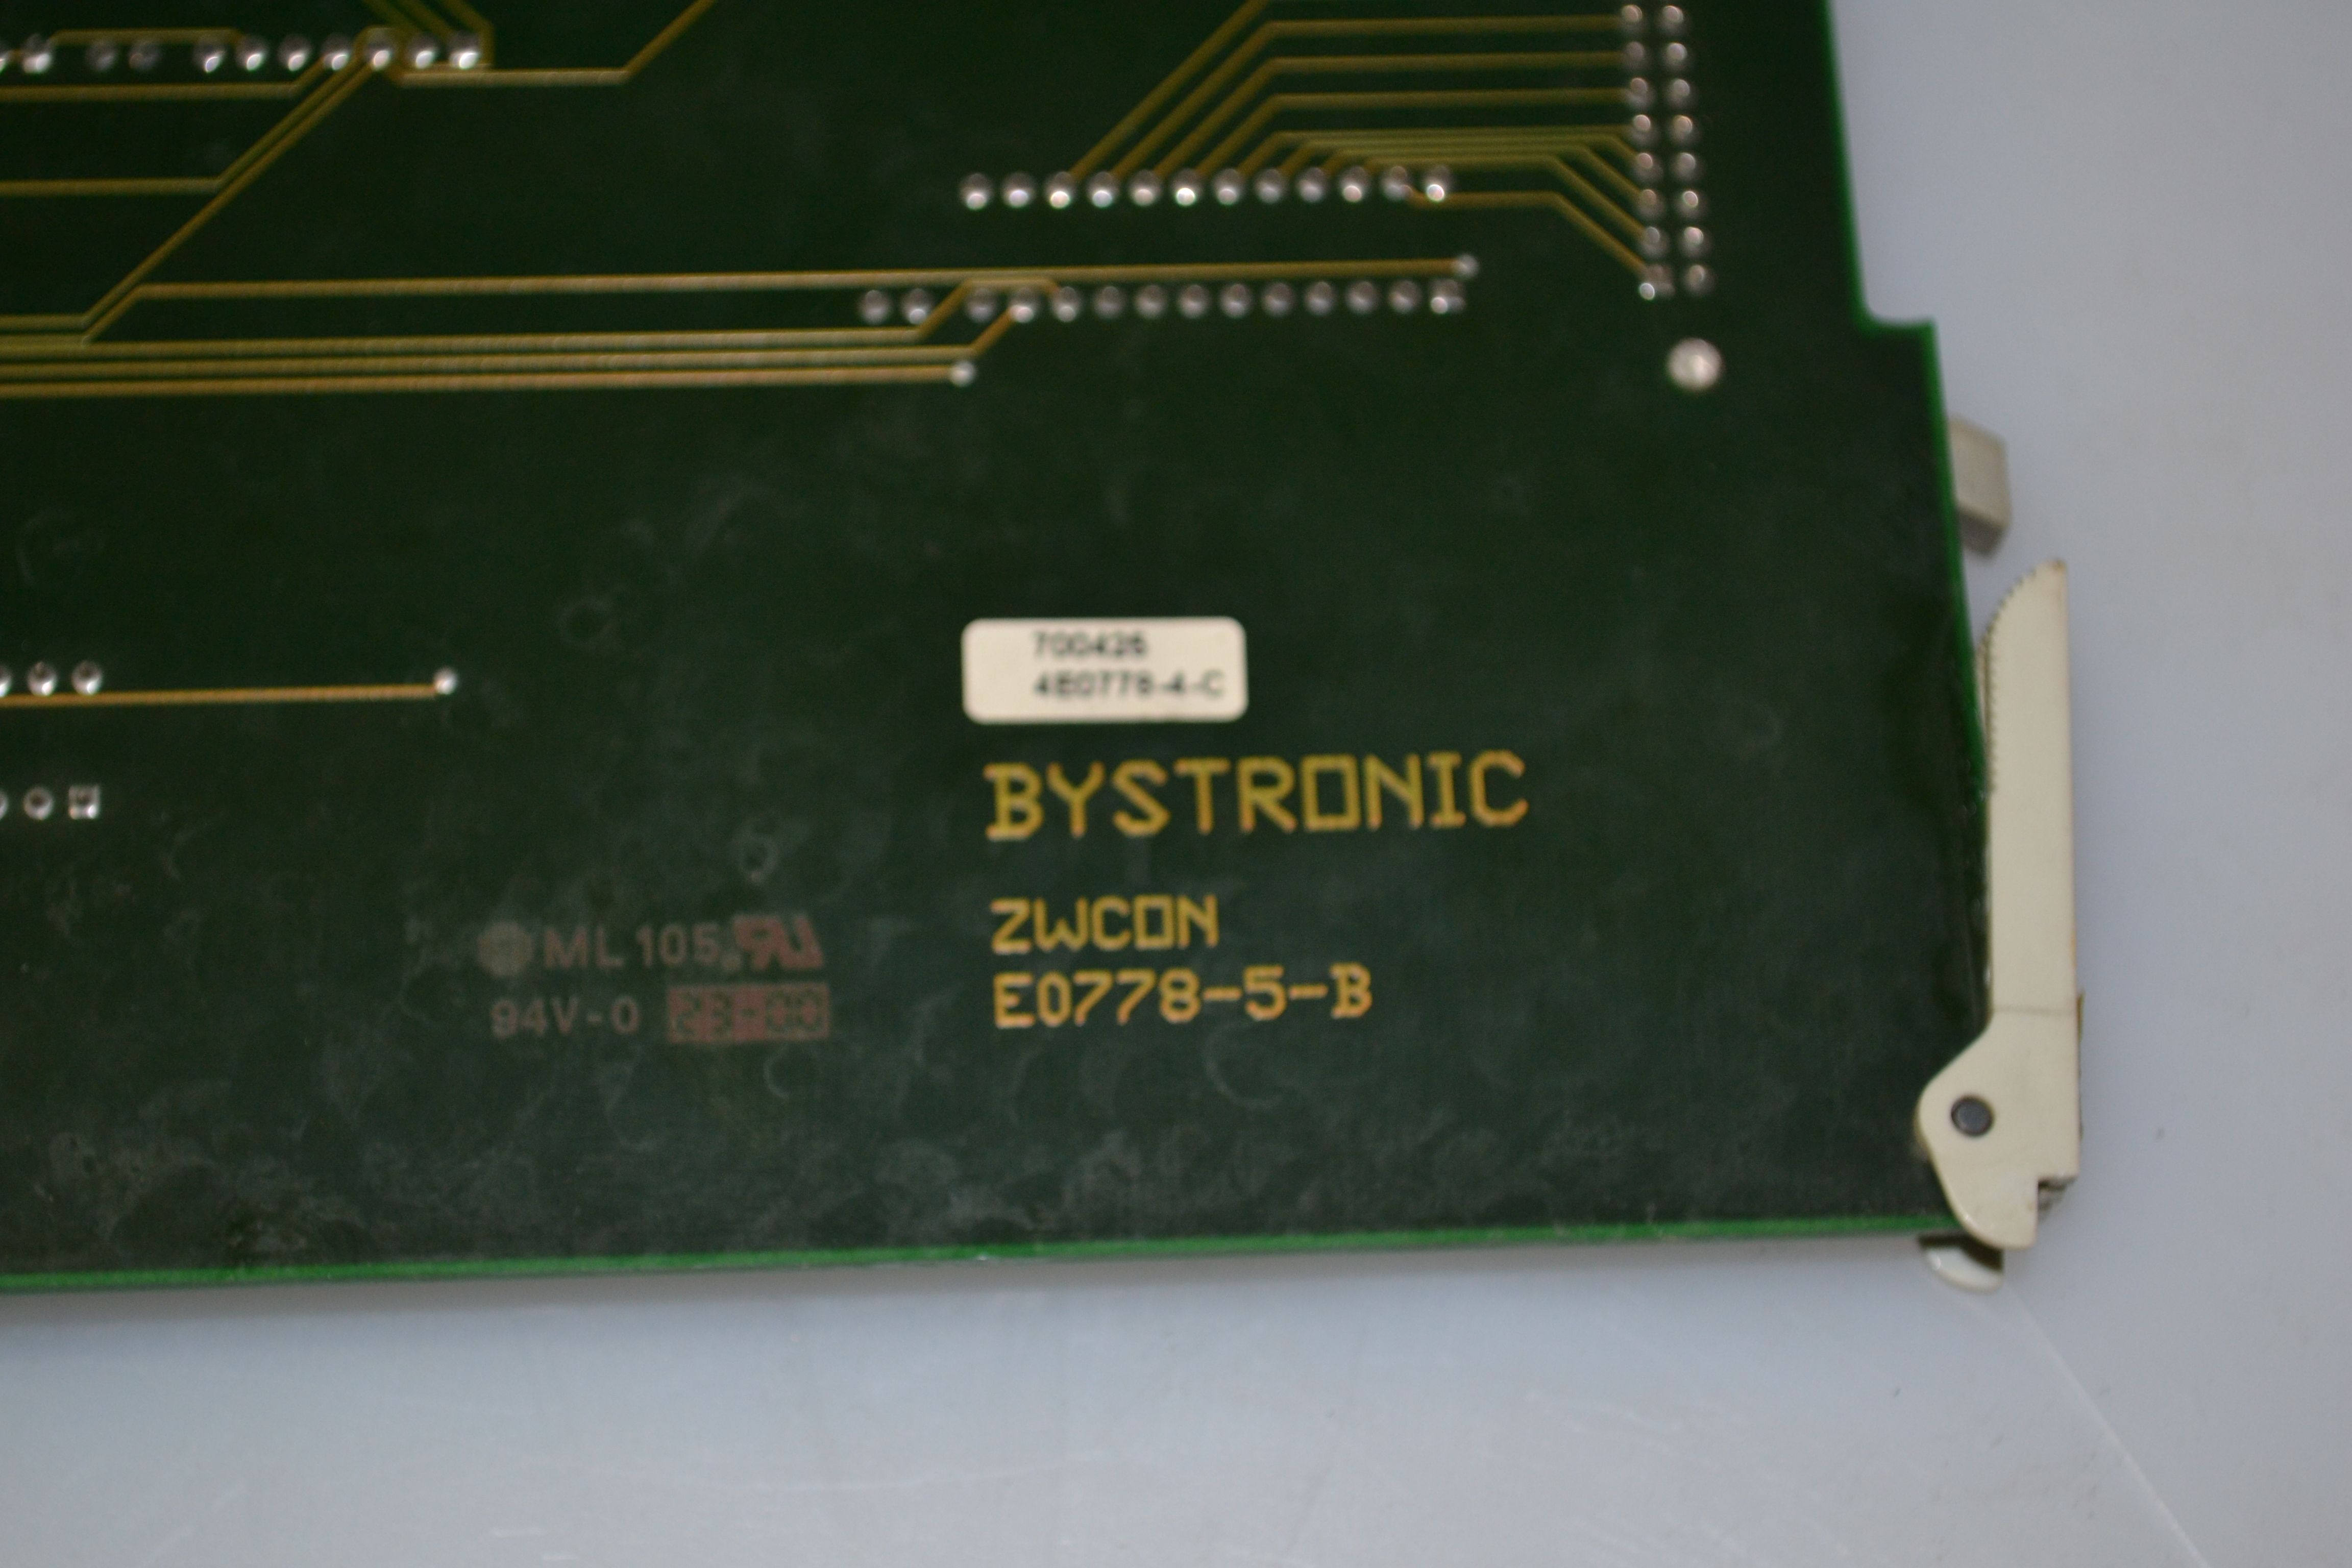 BYSTRONIC ZWCON E0778-5-B